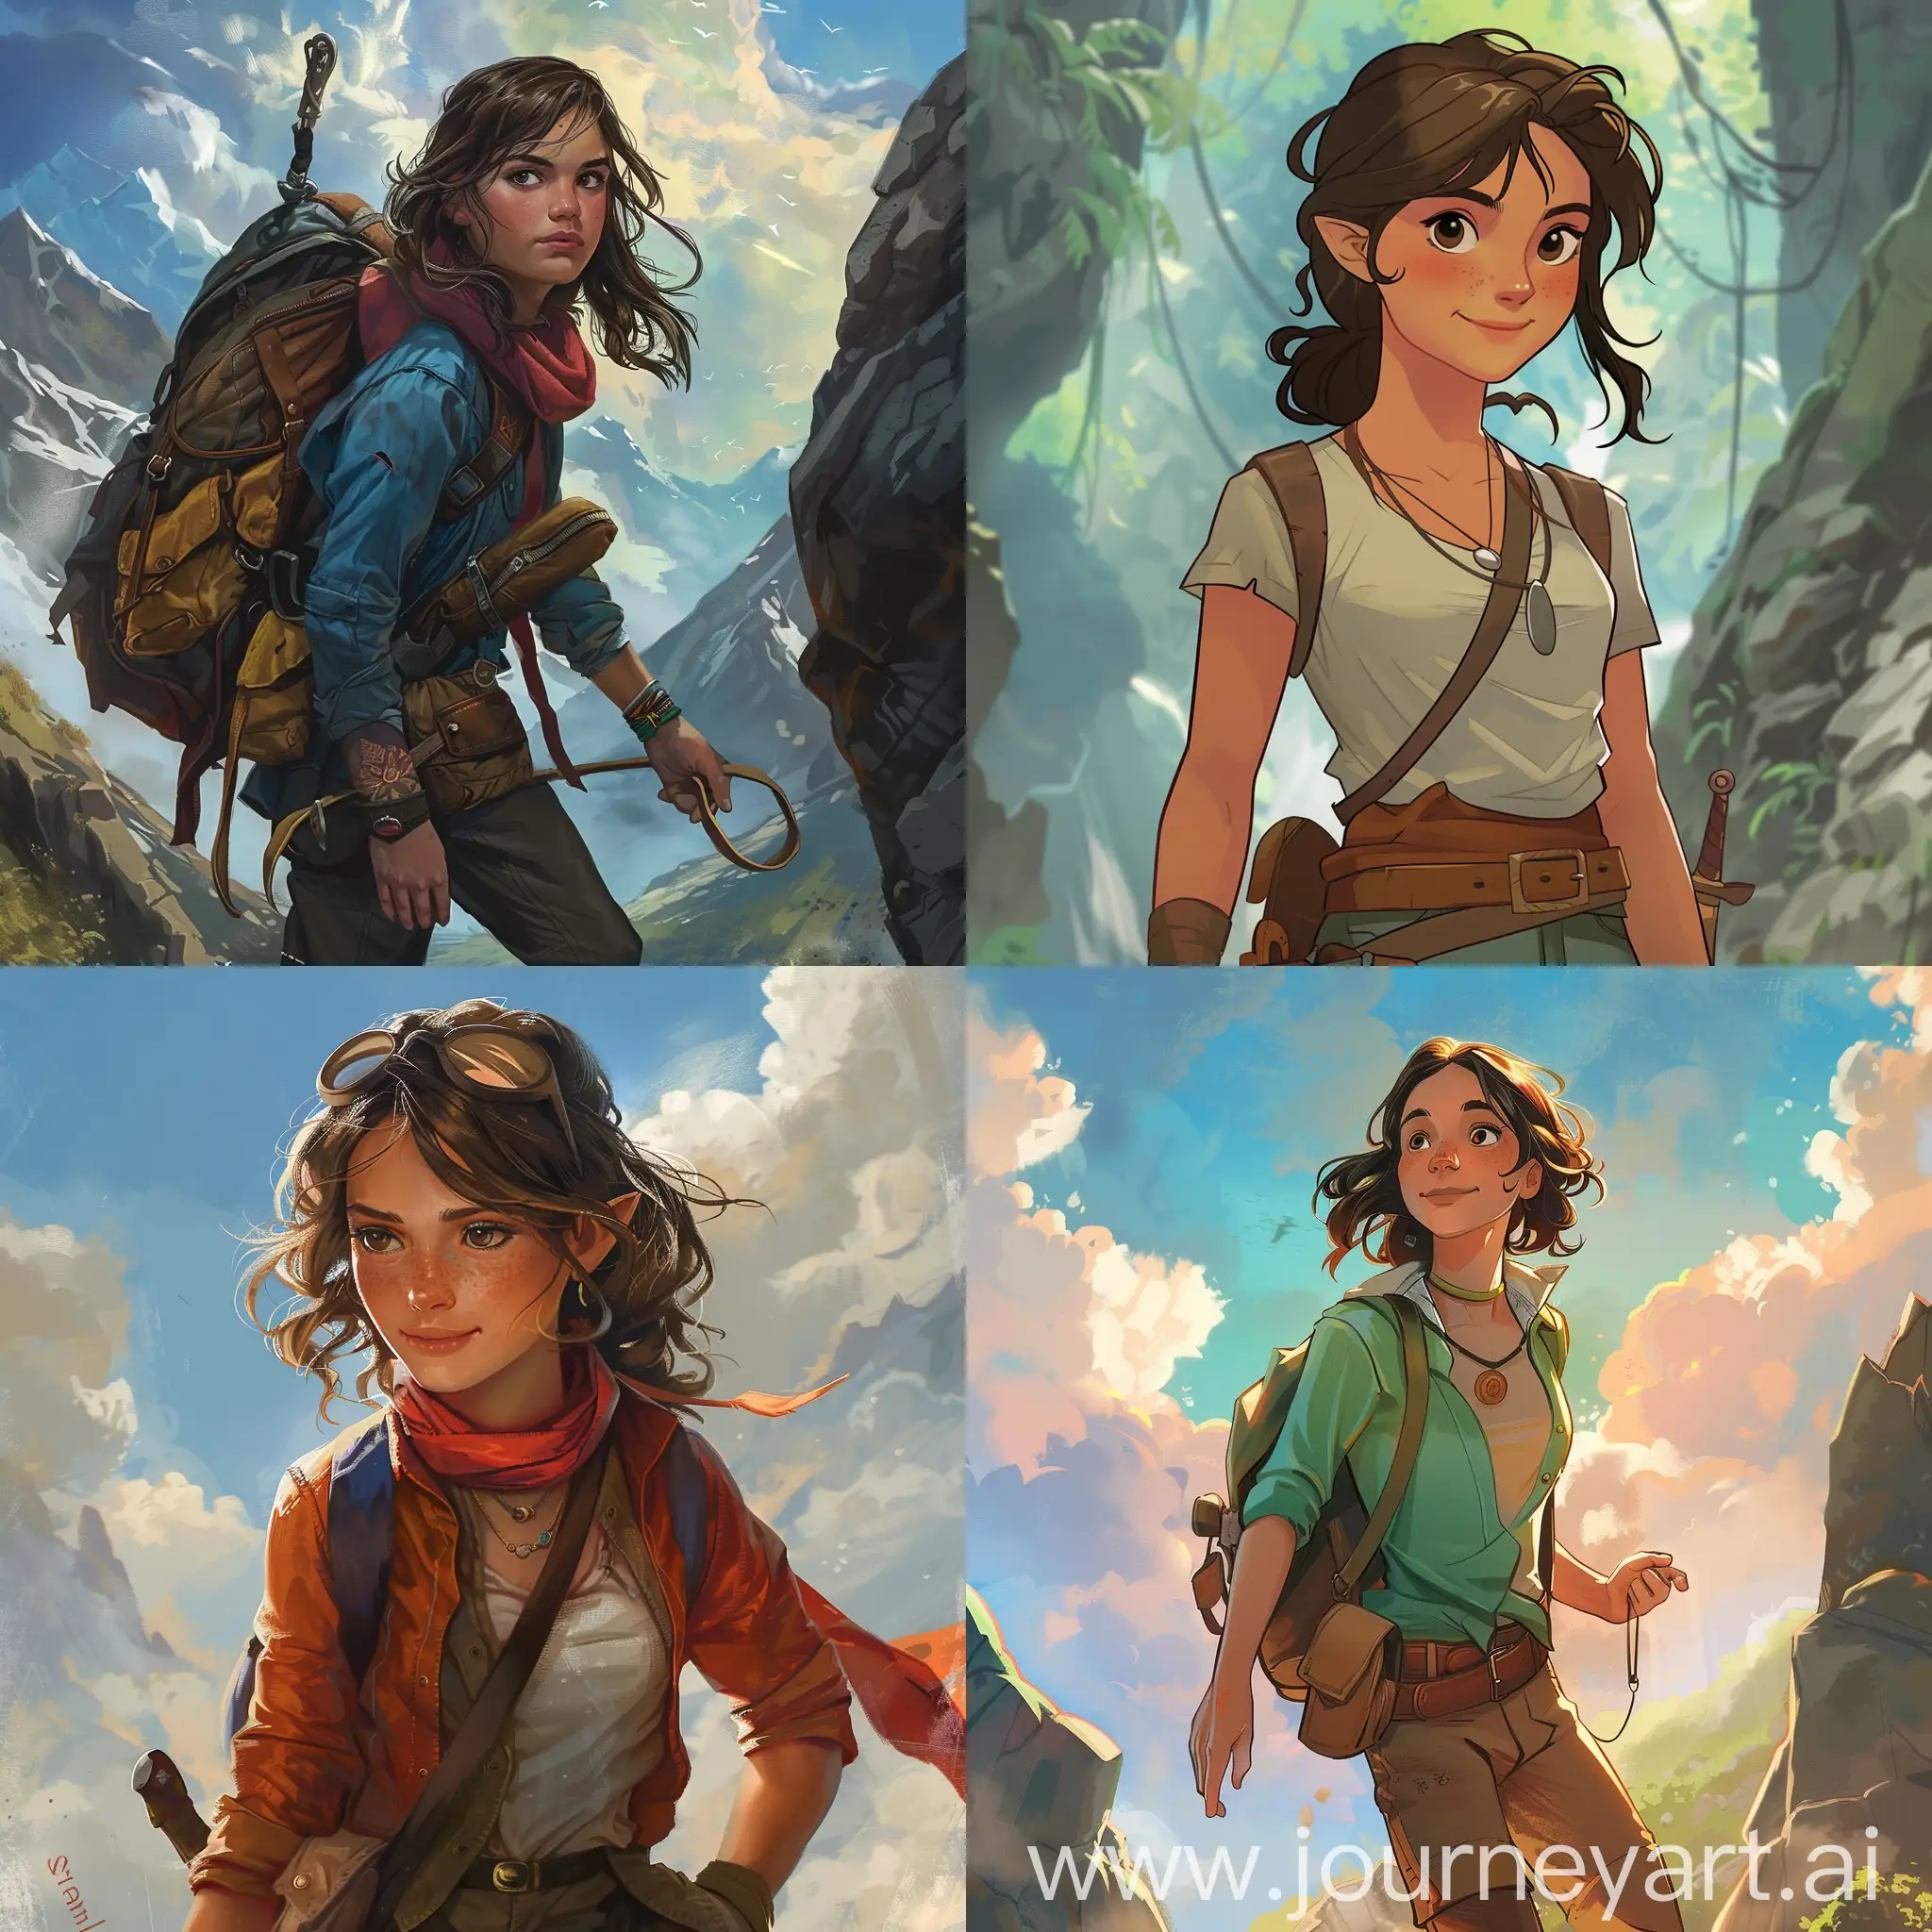 Sarah was a young adventurer who had always dreamed of going on an epic quest. She longed for adventure and excitement, and one day she decided to set out on her own journey.